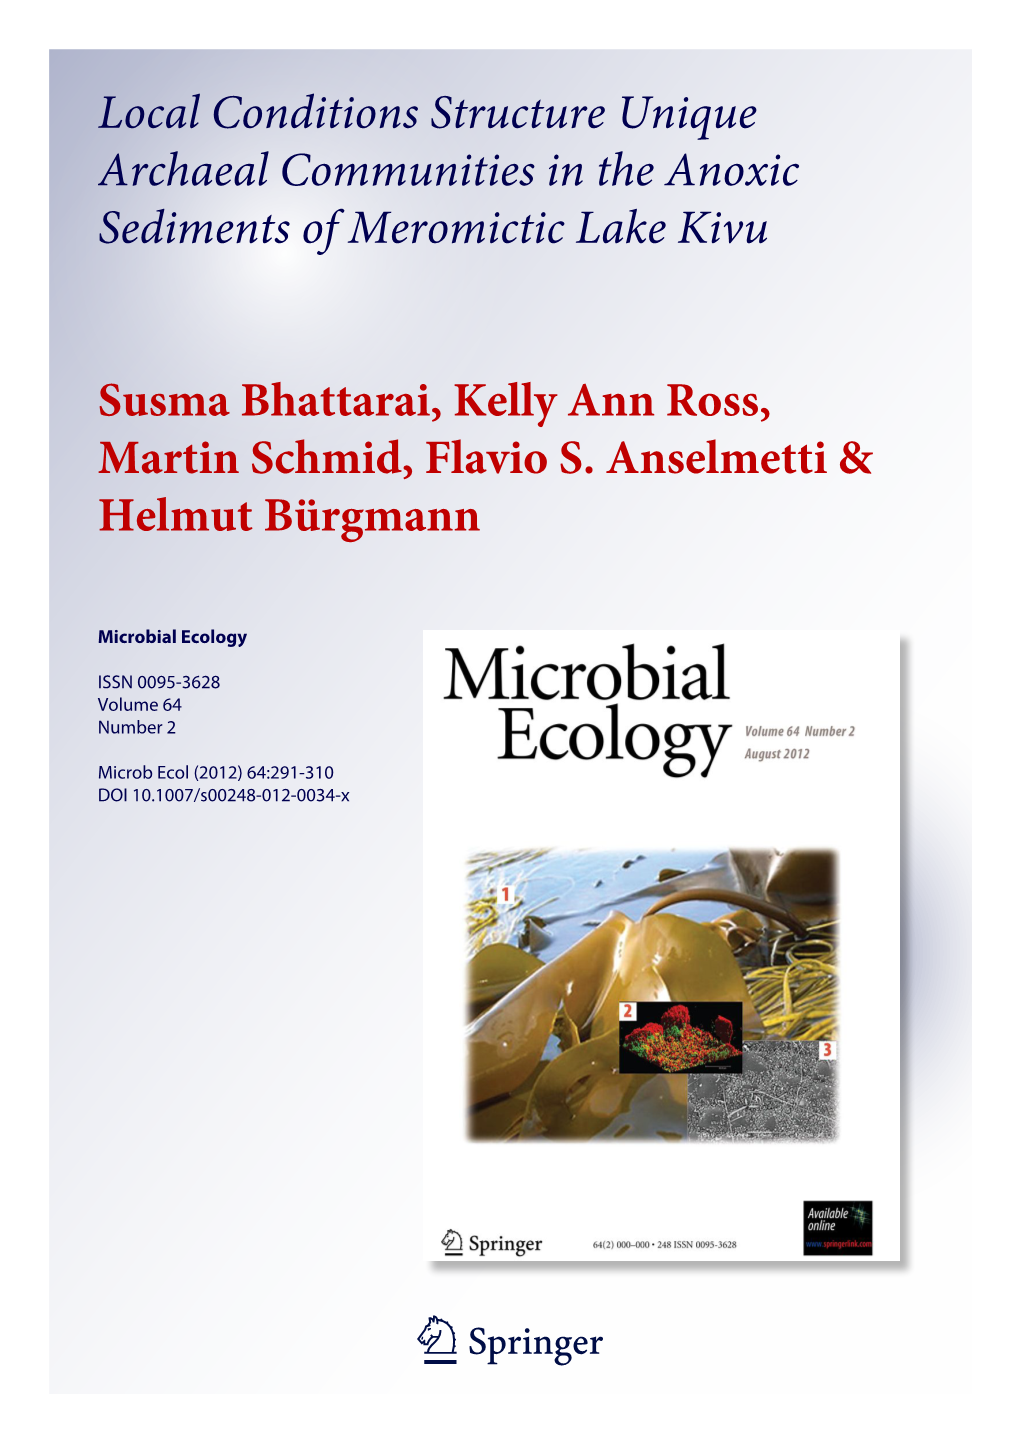 Local Conditions Structure Unique Archaeal Communities in the Anoxic Sediments of Meromictic Lake Kivu